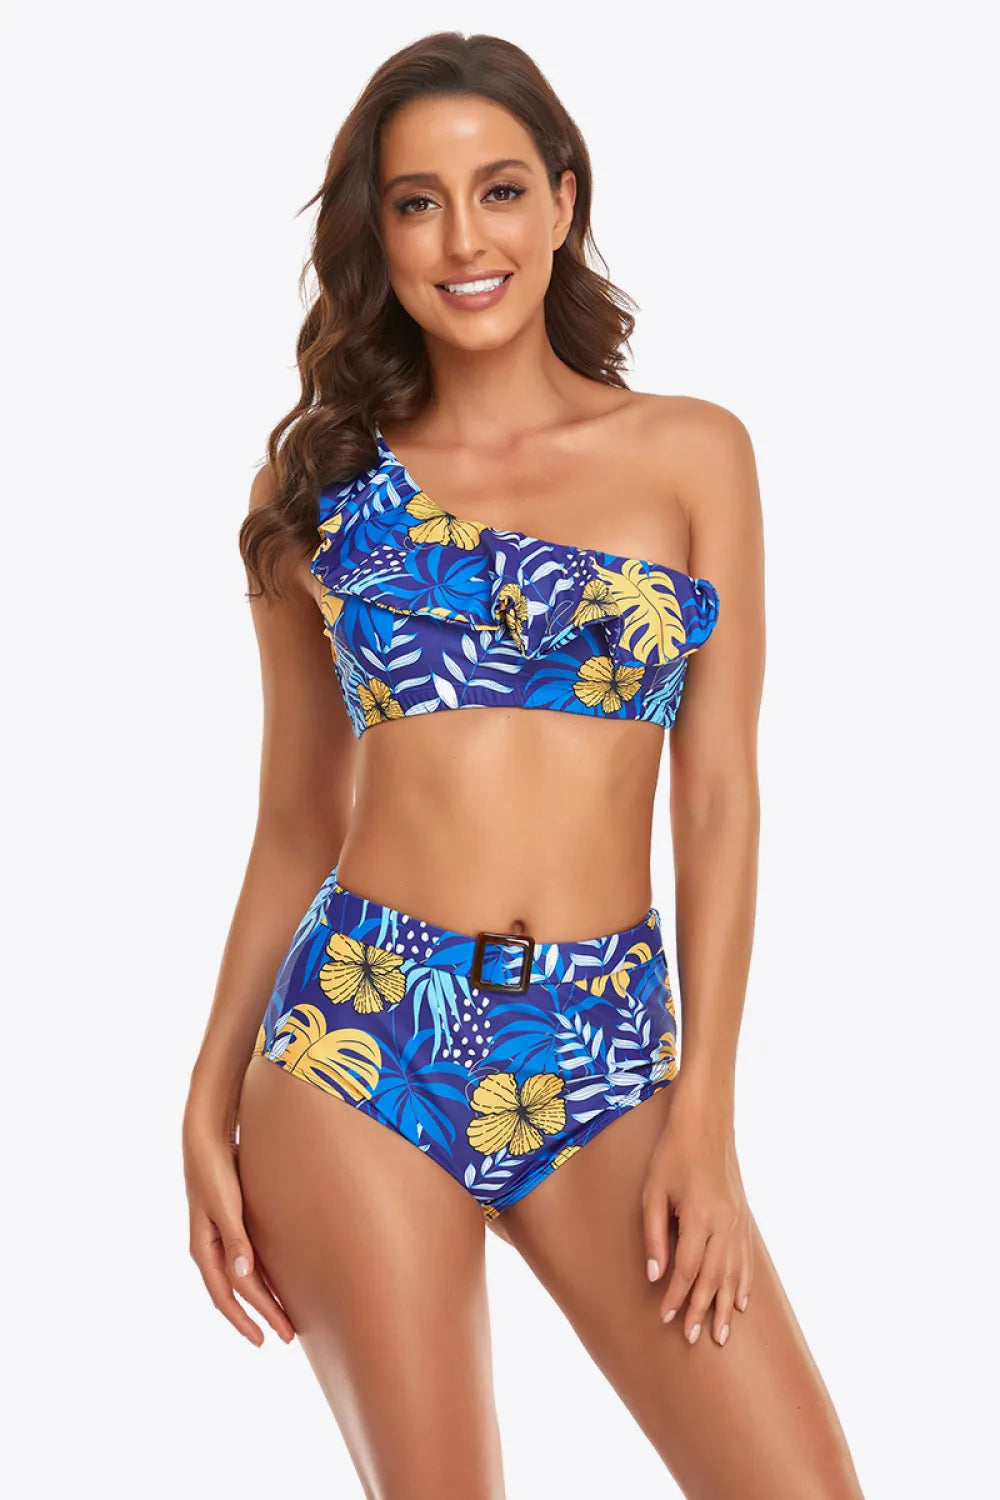 Blue floral bikinis are all the rage this year - grab yours today before they sell out!